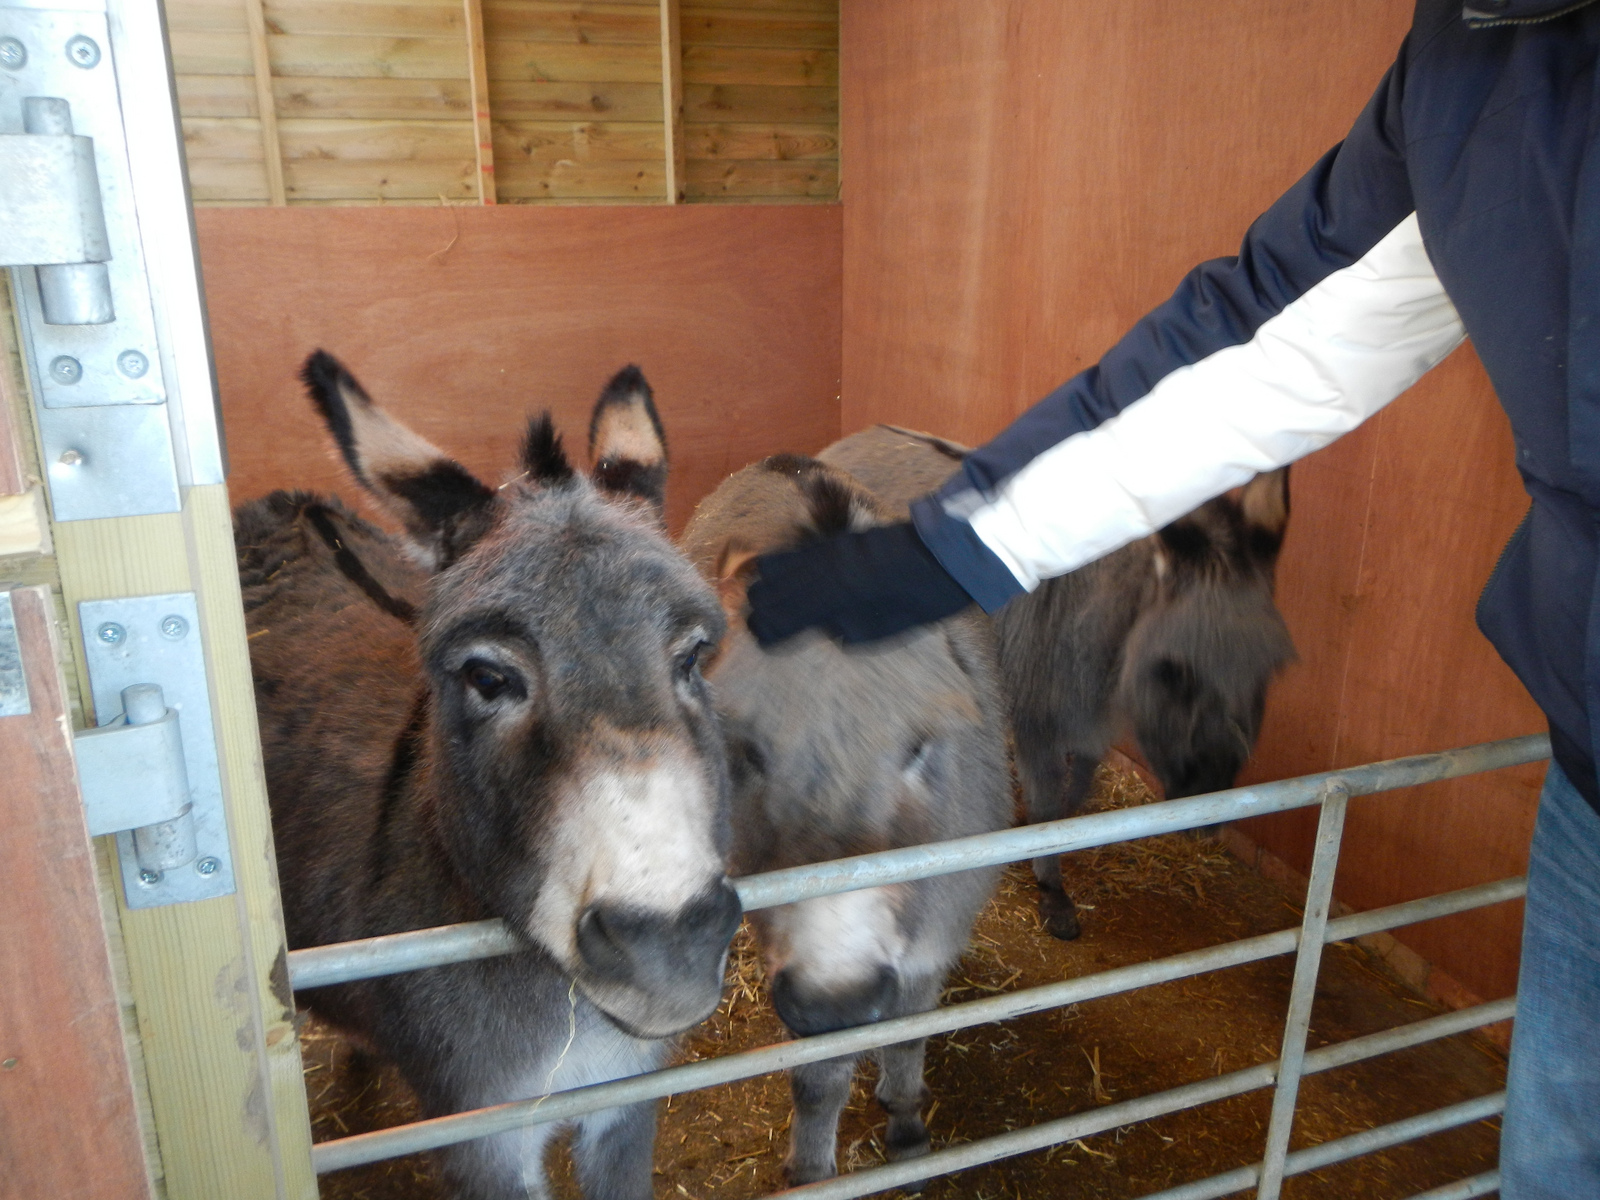  ​Donkeys. The one in the middle kept getting shoved by the other two. 